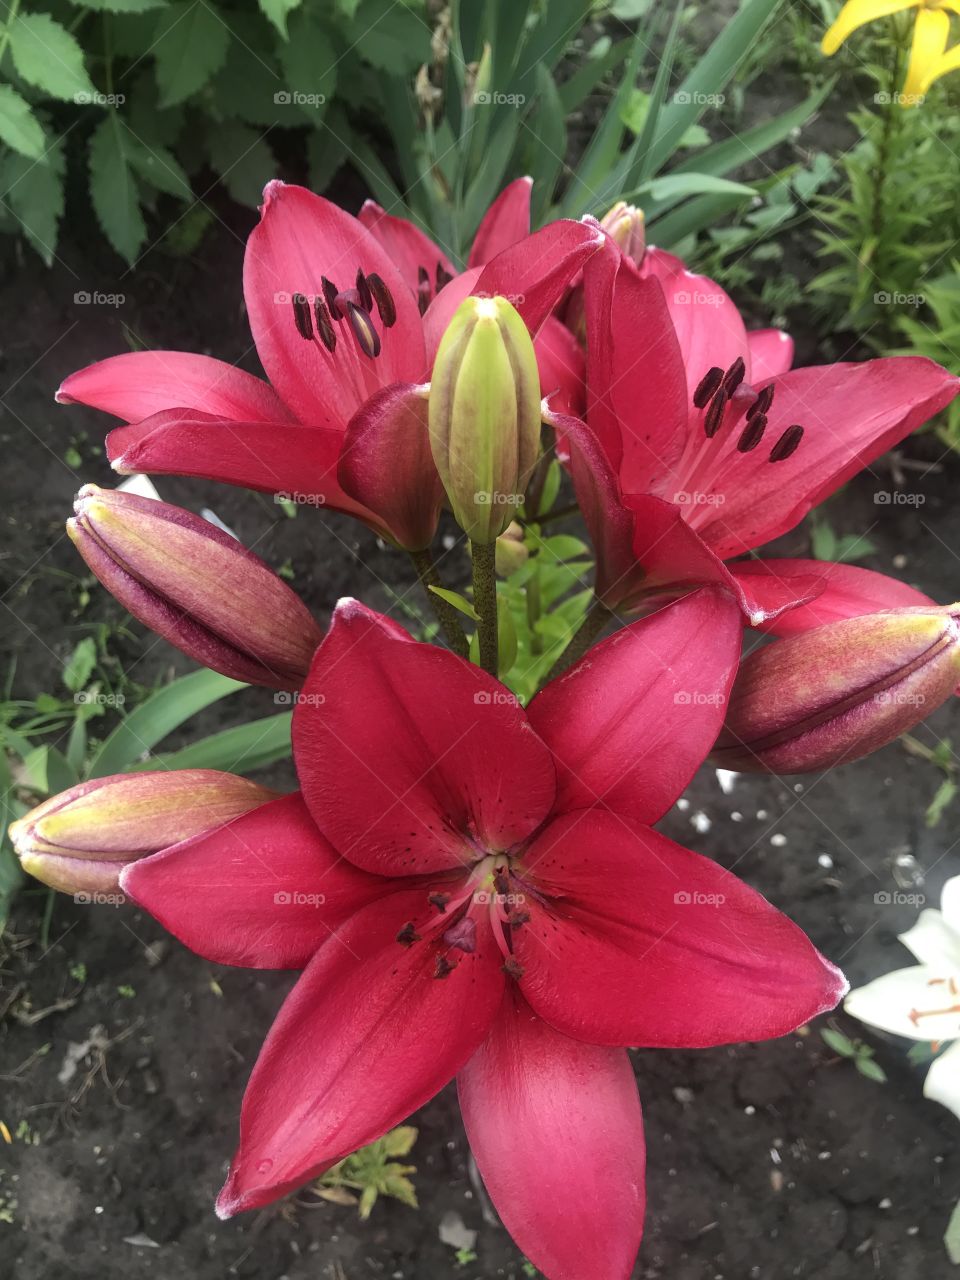 Bulbous plant - lily. Flower in the garden. Blooming lily bud.